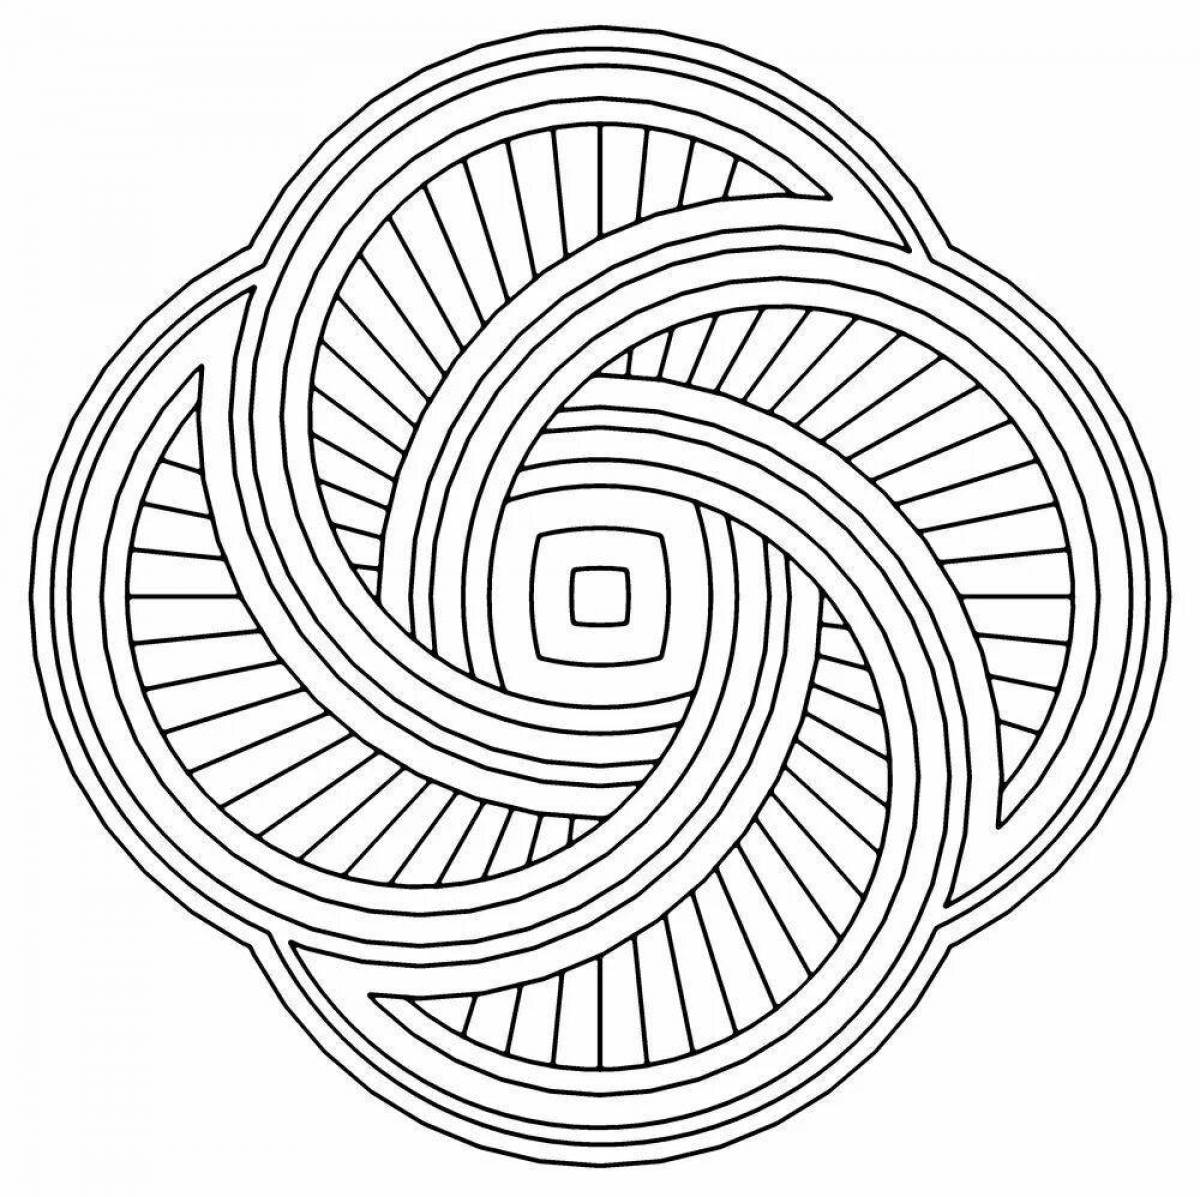 Coloring page dazzling striped circle